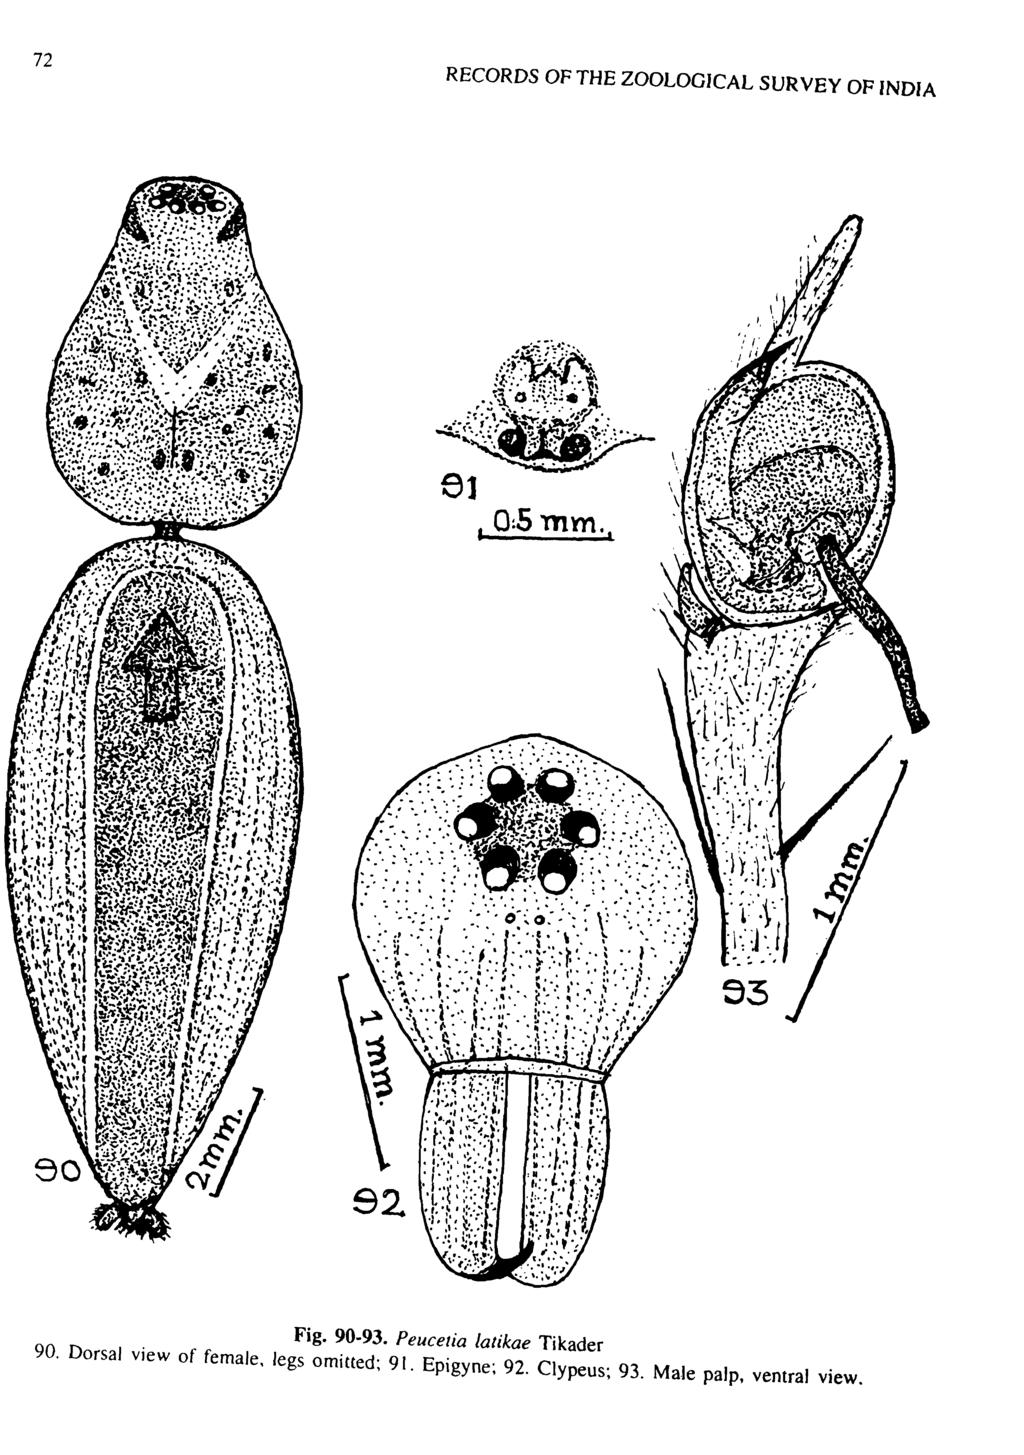 72 RECORDS OF THE ZOOLOGICAL SURVEY OF INDIA 0:5 mm., 53 92 Fig. 90-93.